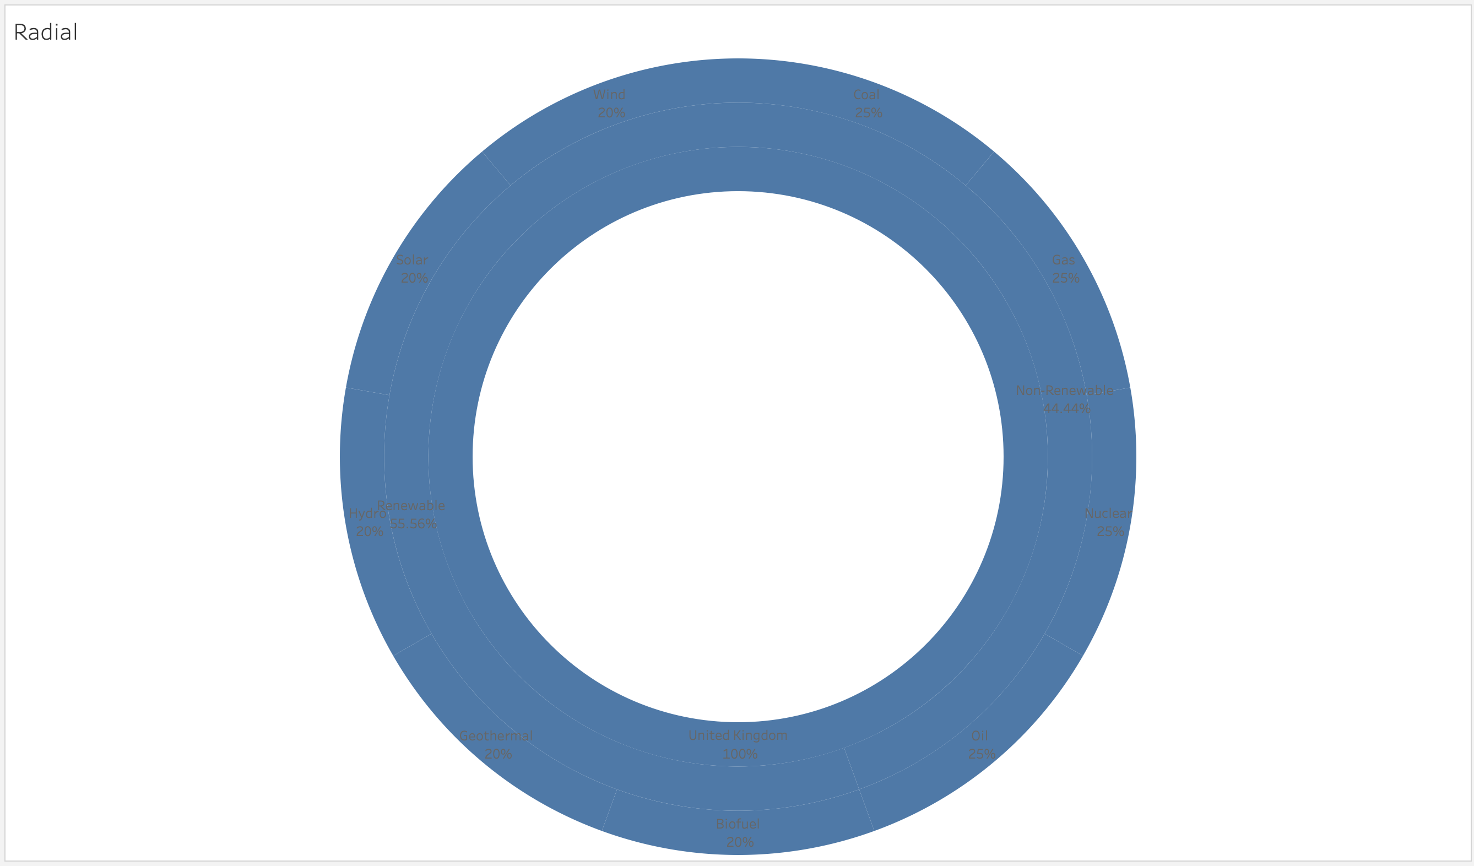 The initial radial. Just looks like a blue donut